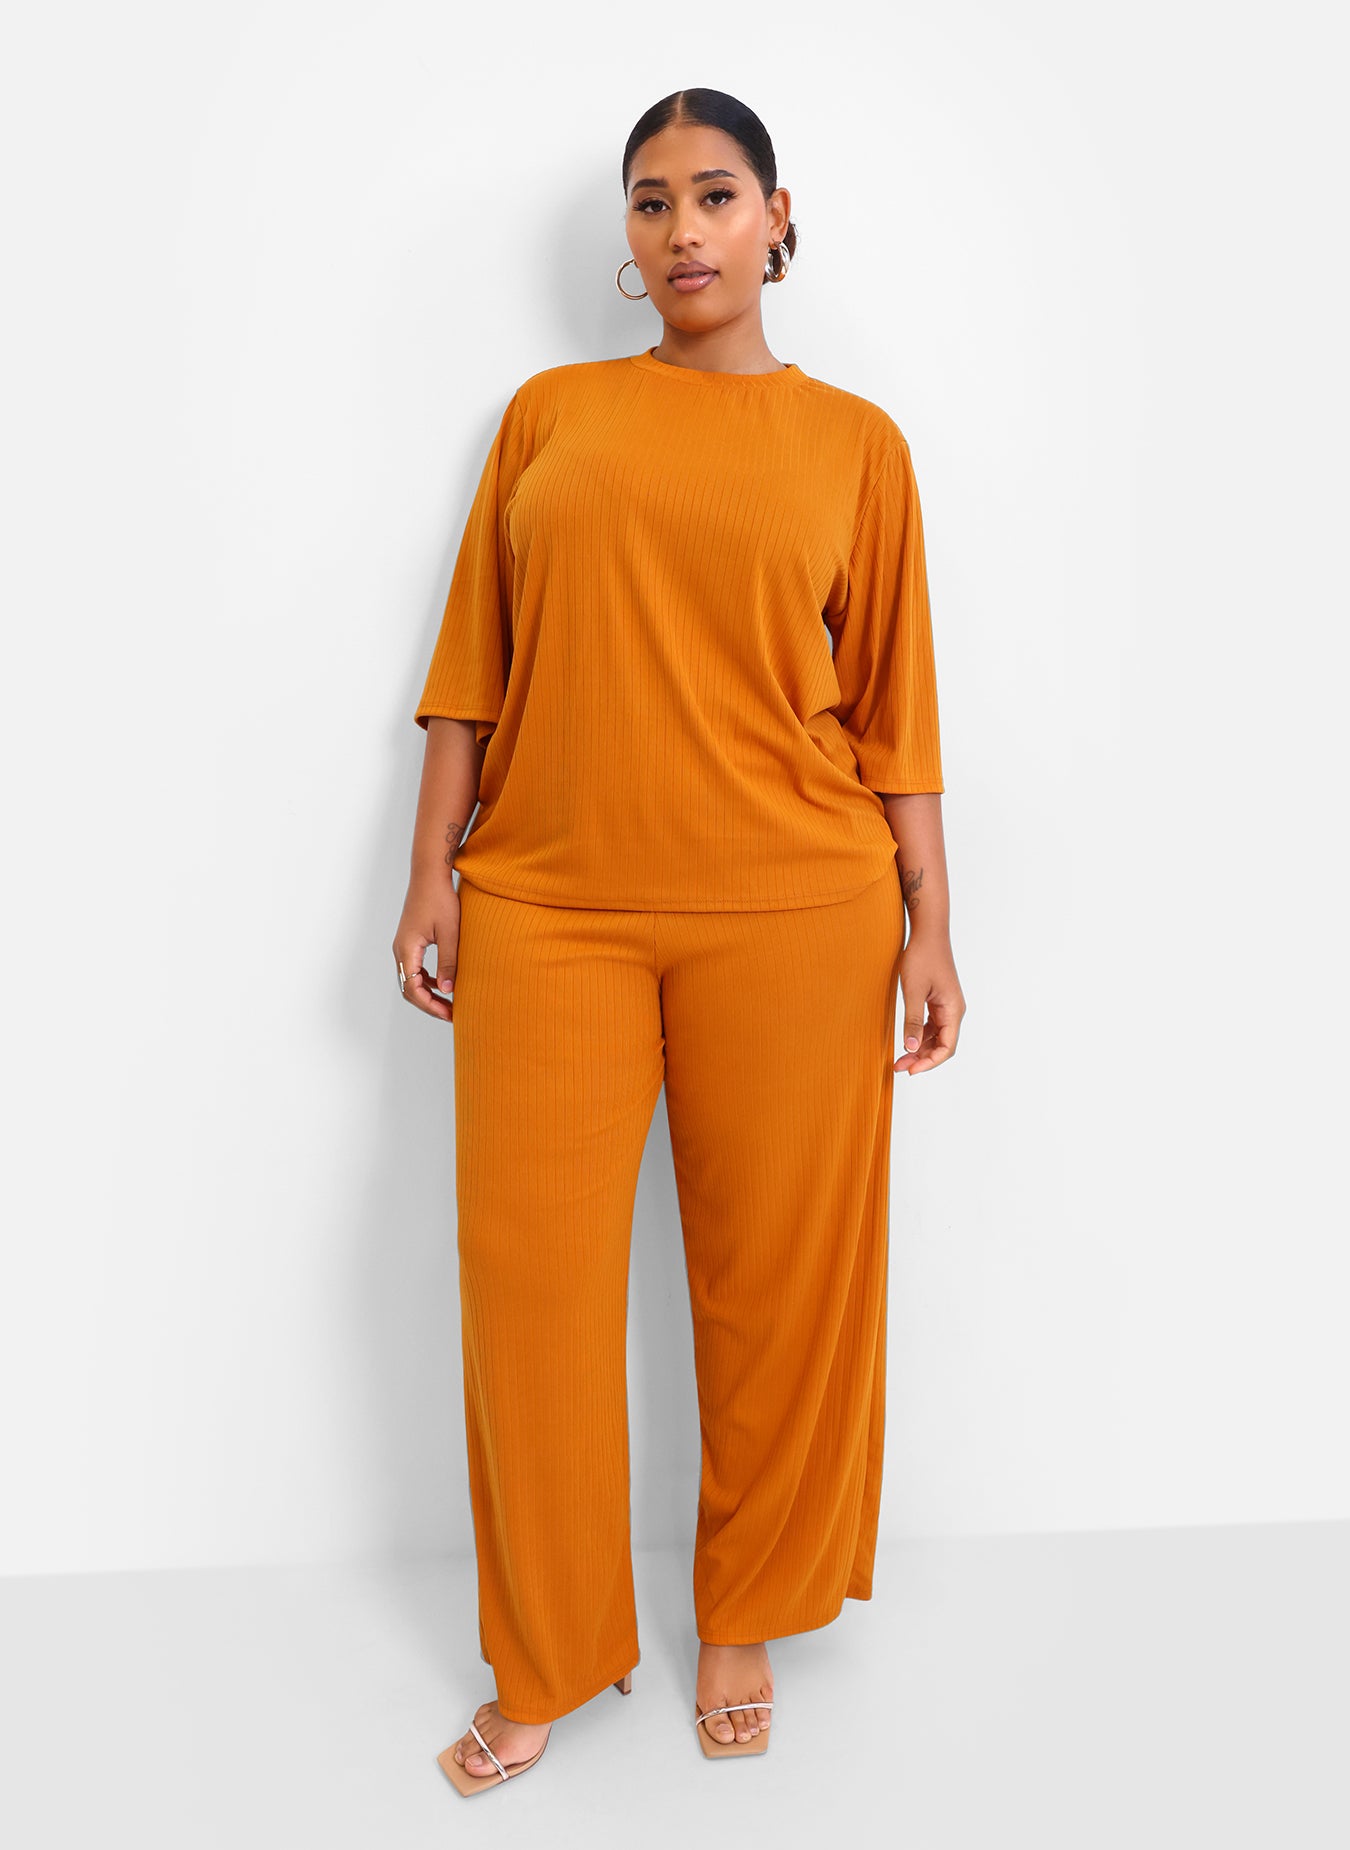 Give It Away Ribbed Wide Leg Pants